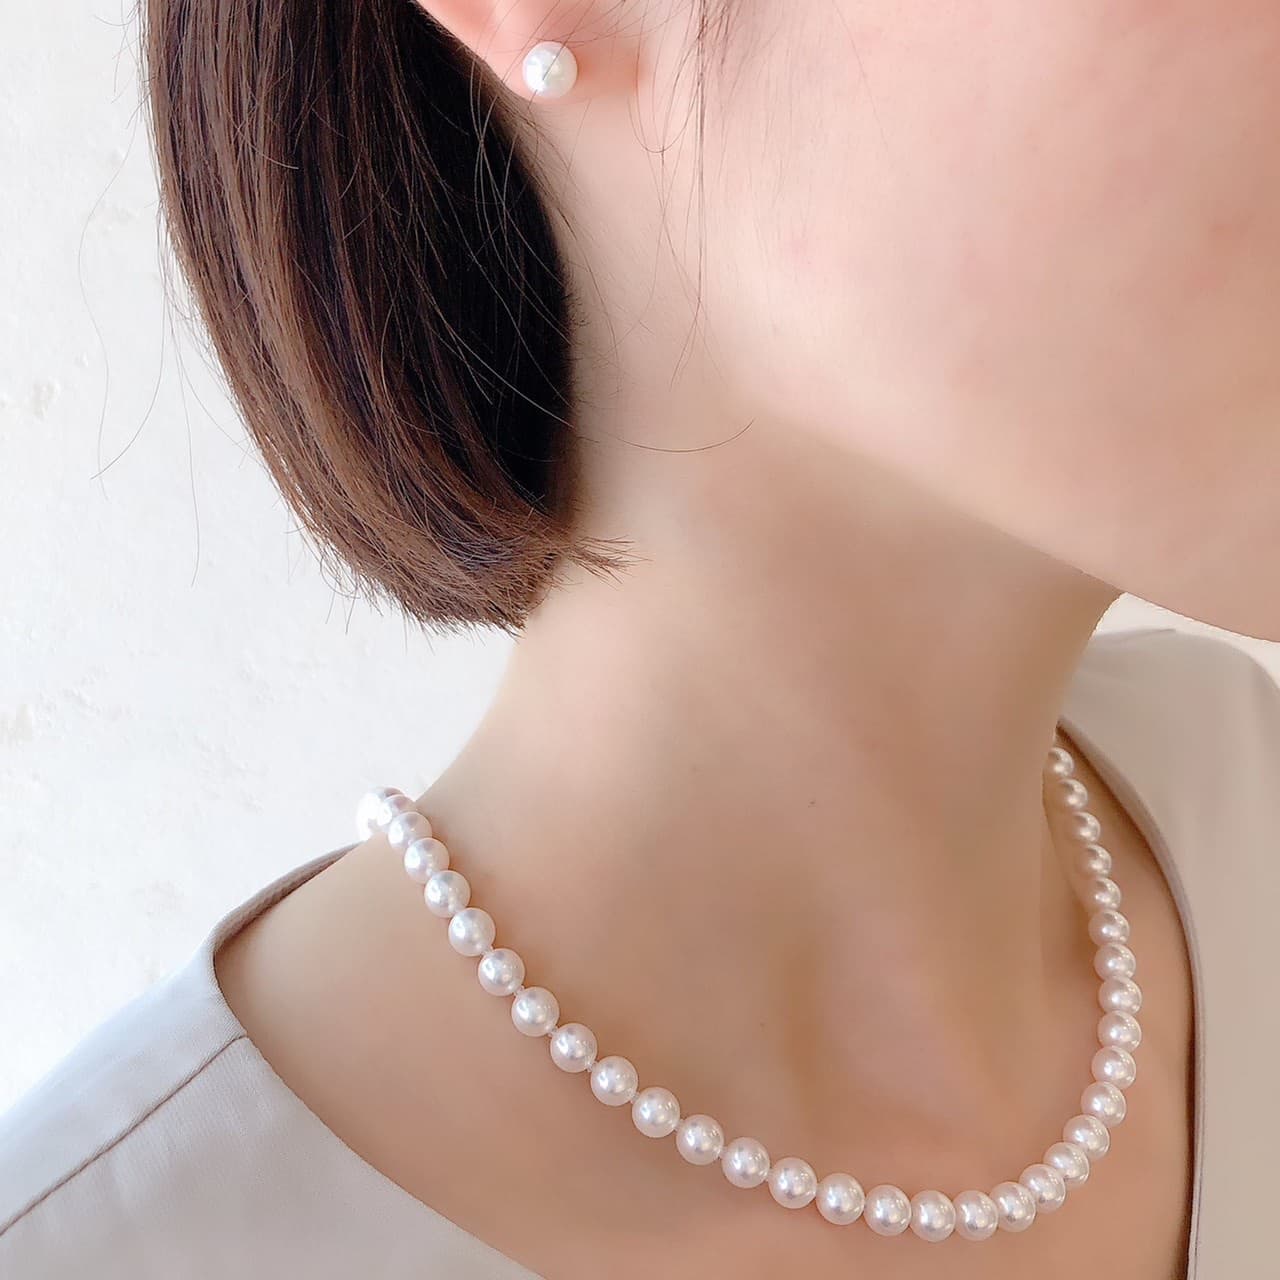 Akoya pearl necklace & pearl earrings set【S】/アコヤ真珠ネックレス＆イヤリングセット Sサイズ-2